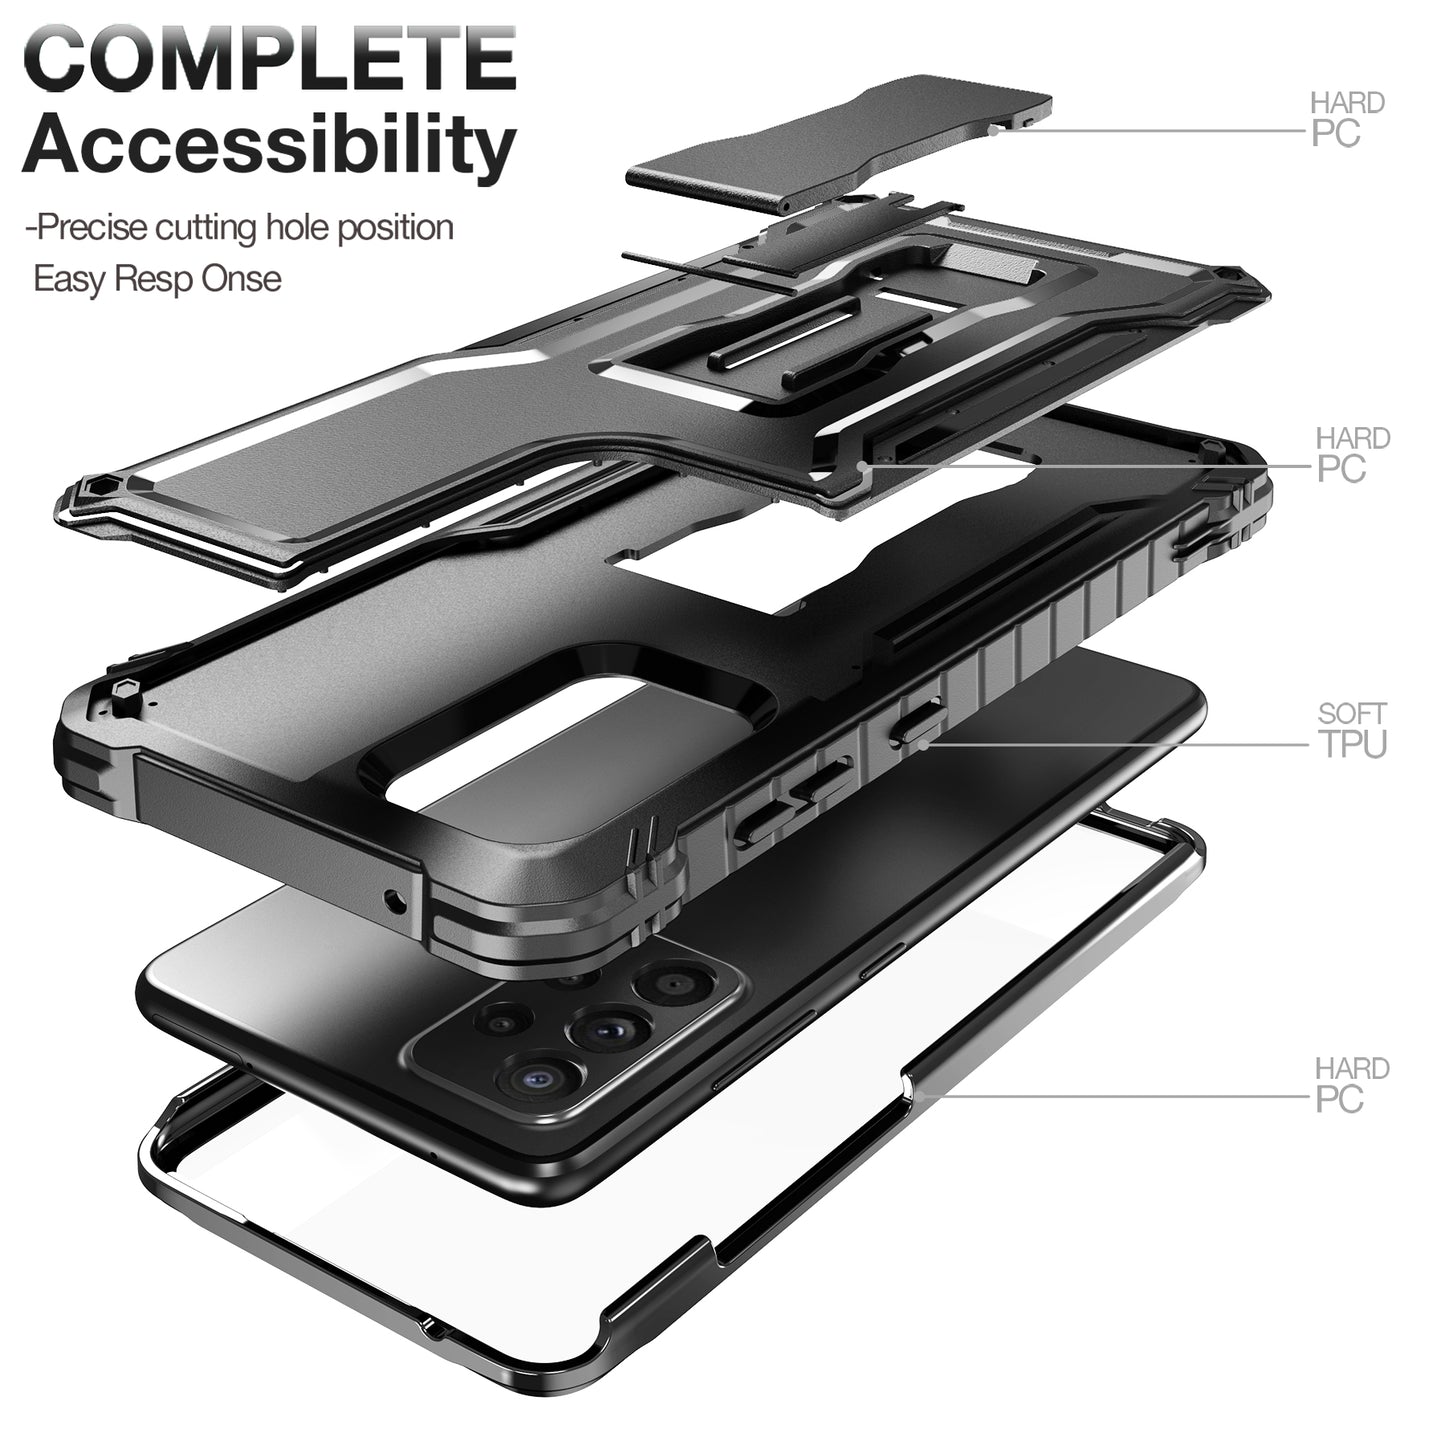 FITO Samsung A52 Case Built in Screen Protector, Dual Layer Shockproof Heavy Duty Case with Kickstand Compatible with Samsung Galaxy A52 Phone